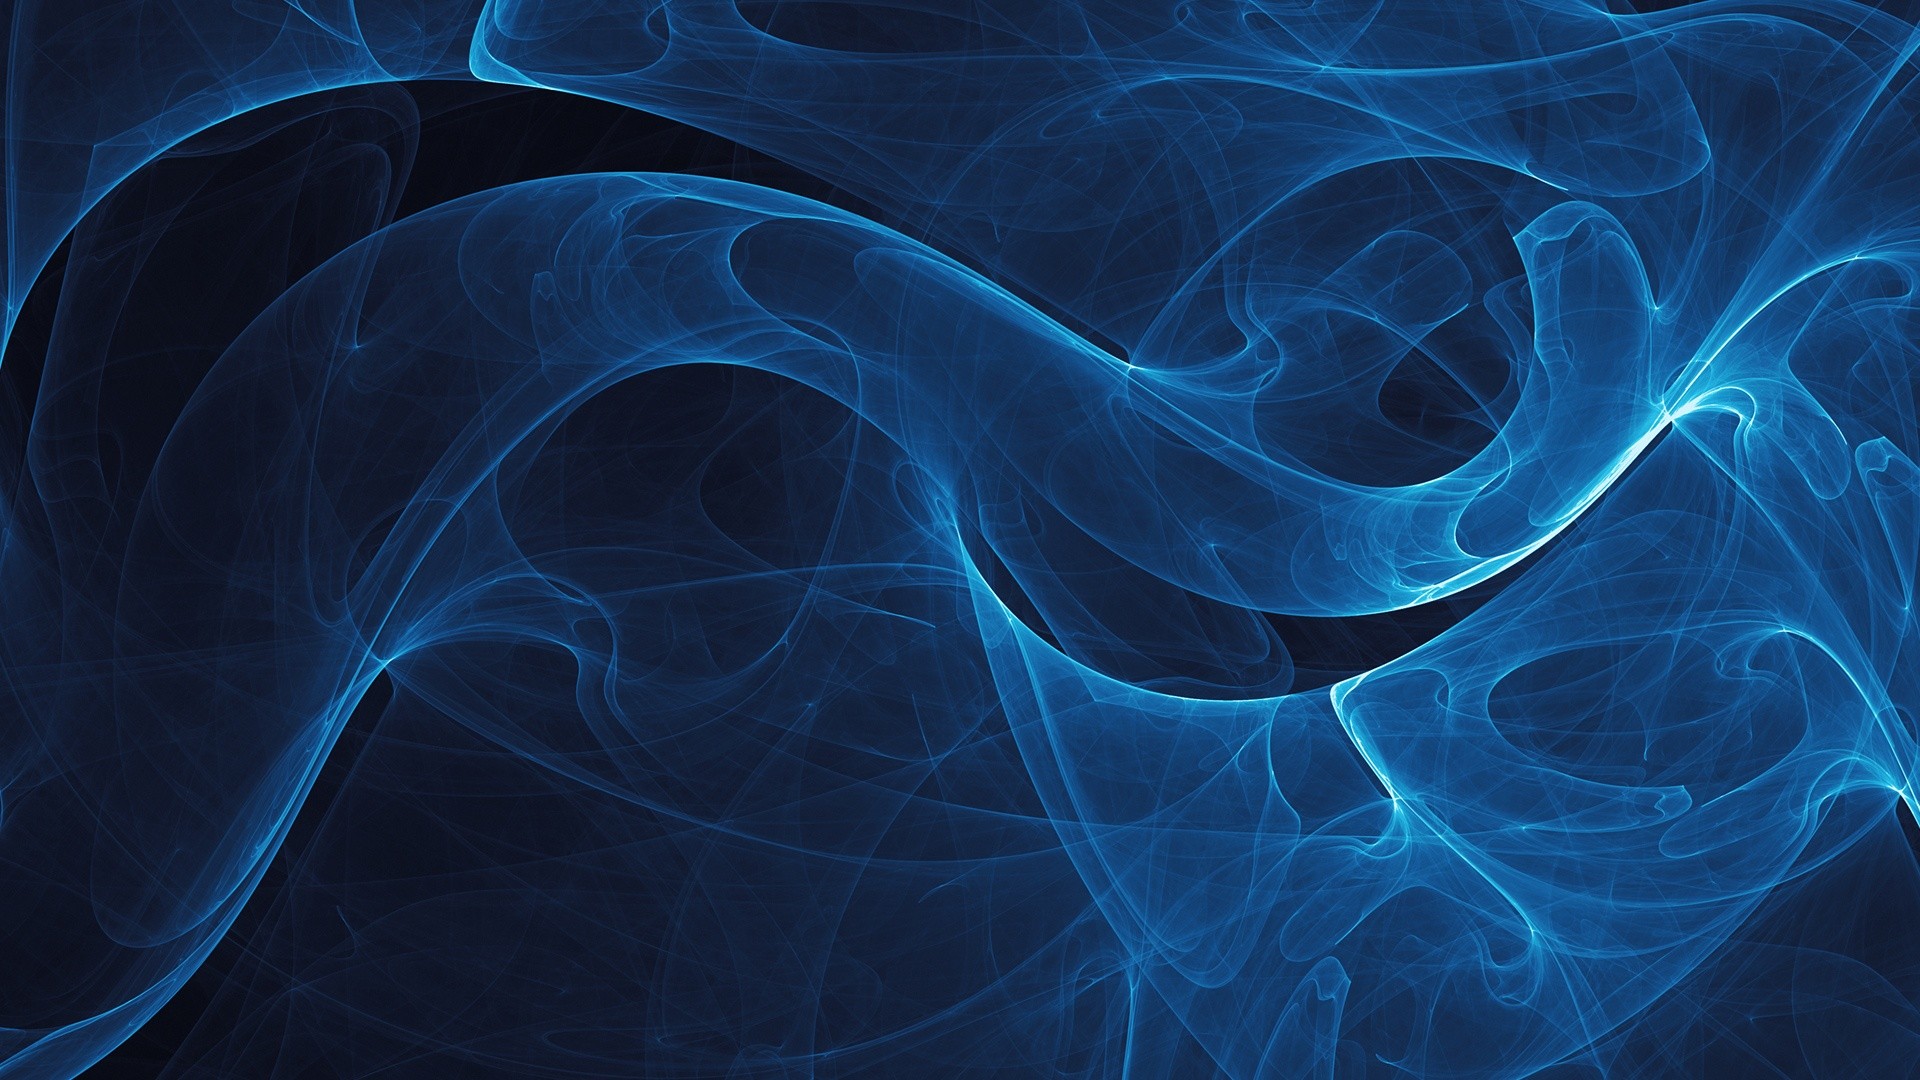 Reptile Blue Abstract Powerpoint Backgrounds Templates | Chainimage